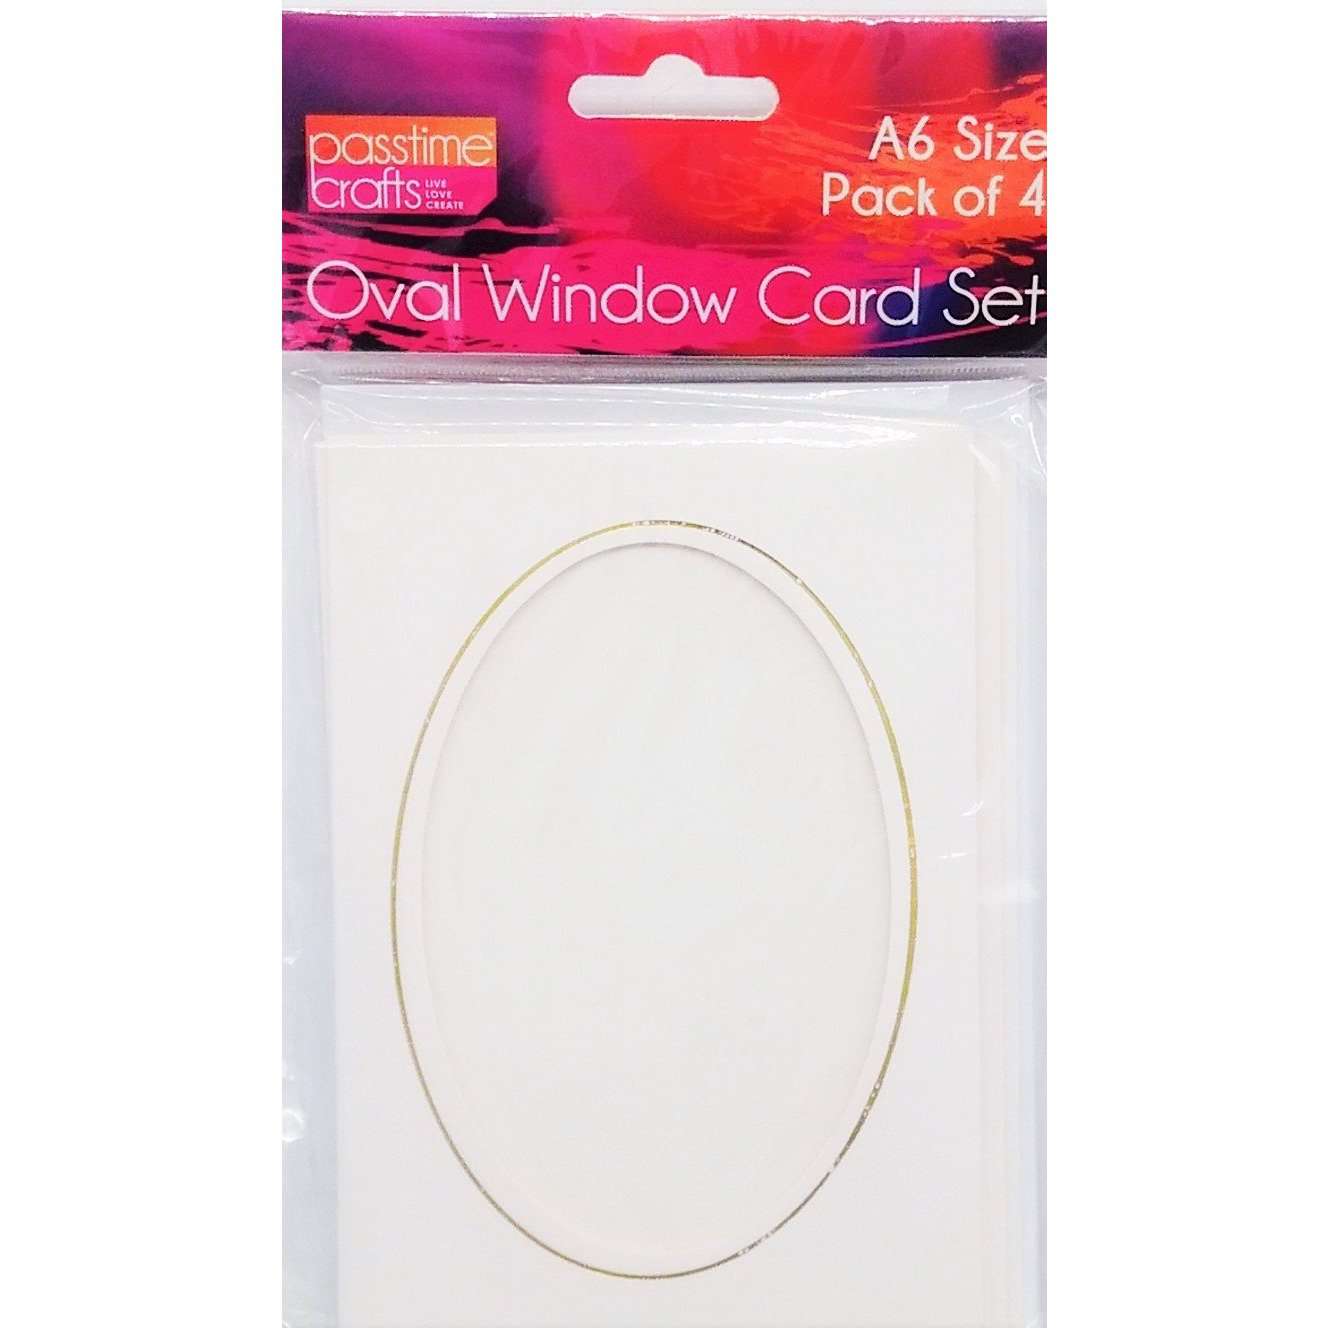 Buy onilne Mont Marte Card & Envelope Set A6 Cut Out Ovall 4 Pack | Dollars and Sense cheap and low prices in australia